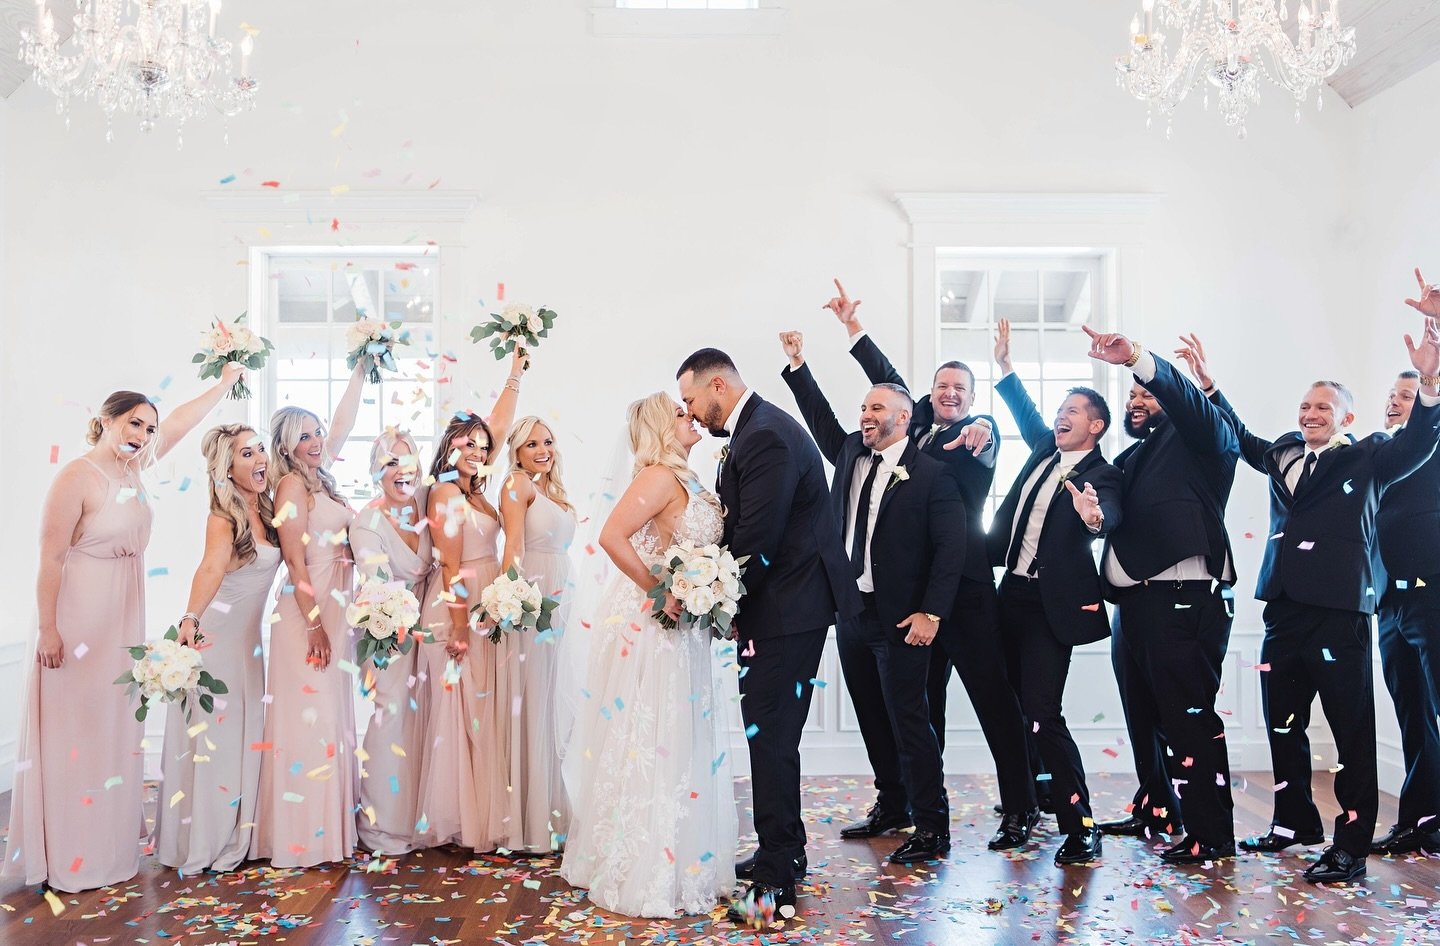 Throwback to this perfect moment with Alden + Marisa surrounded by their favorites 🤍

Big fan of paper confetti for exits and photos like these lately!

#floridaweddingvideographer #floridaweddingphotographer #staugustineweddings #staugustinewedding